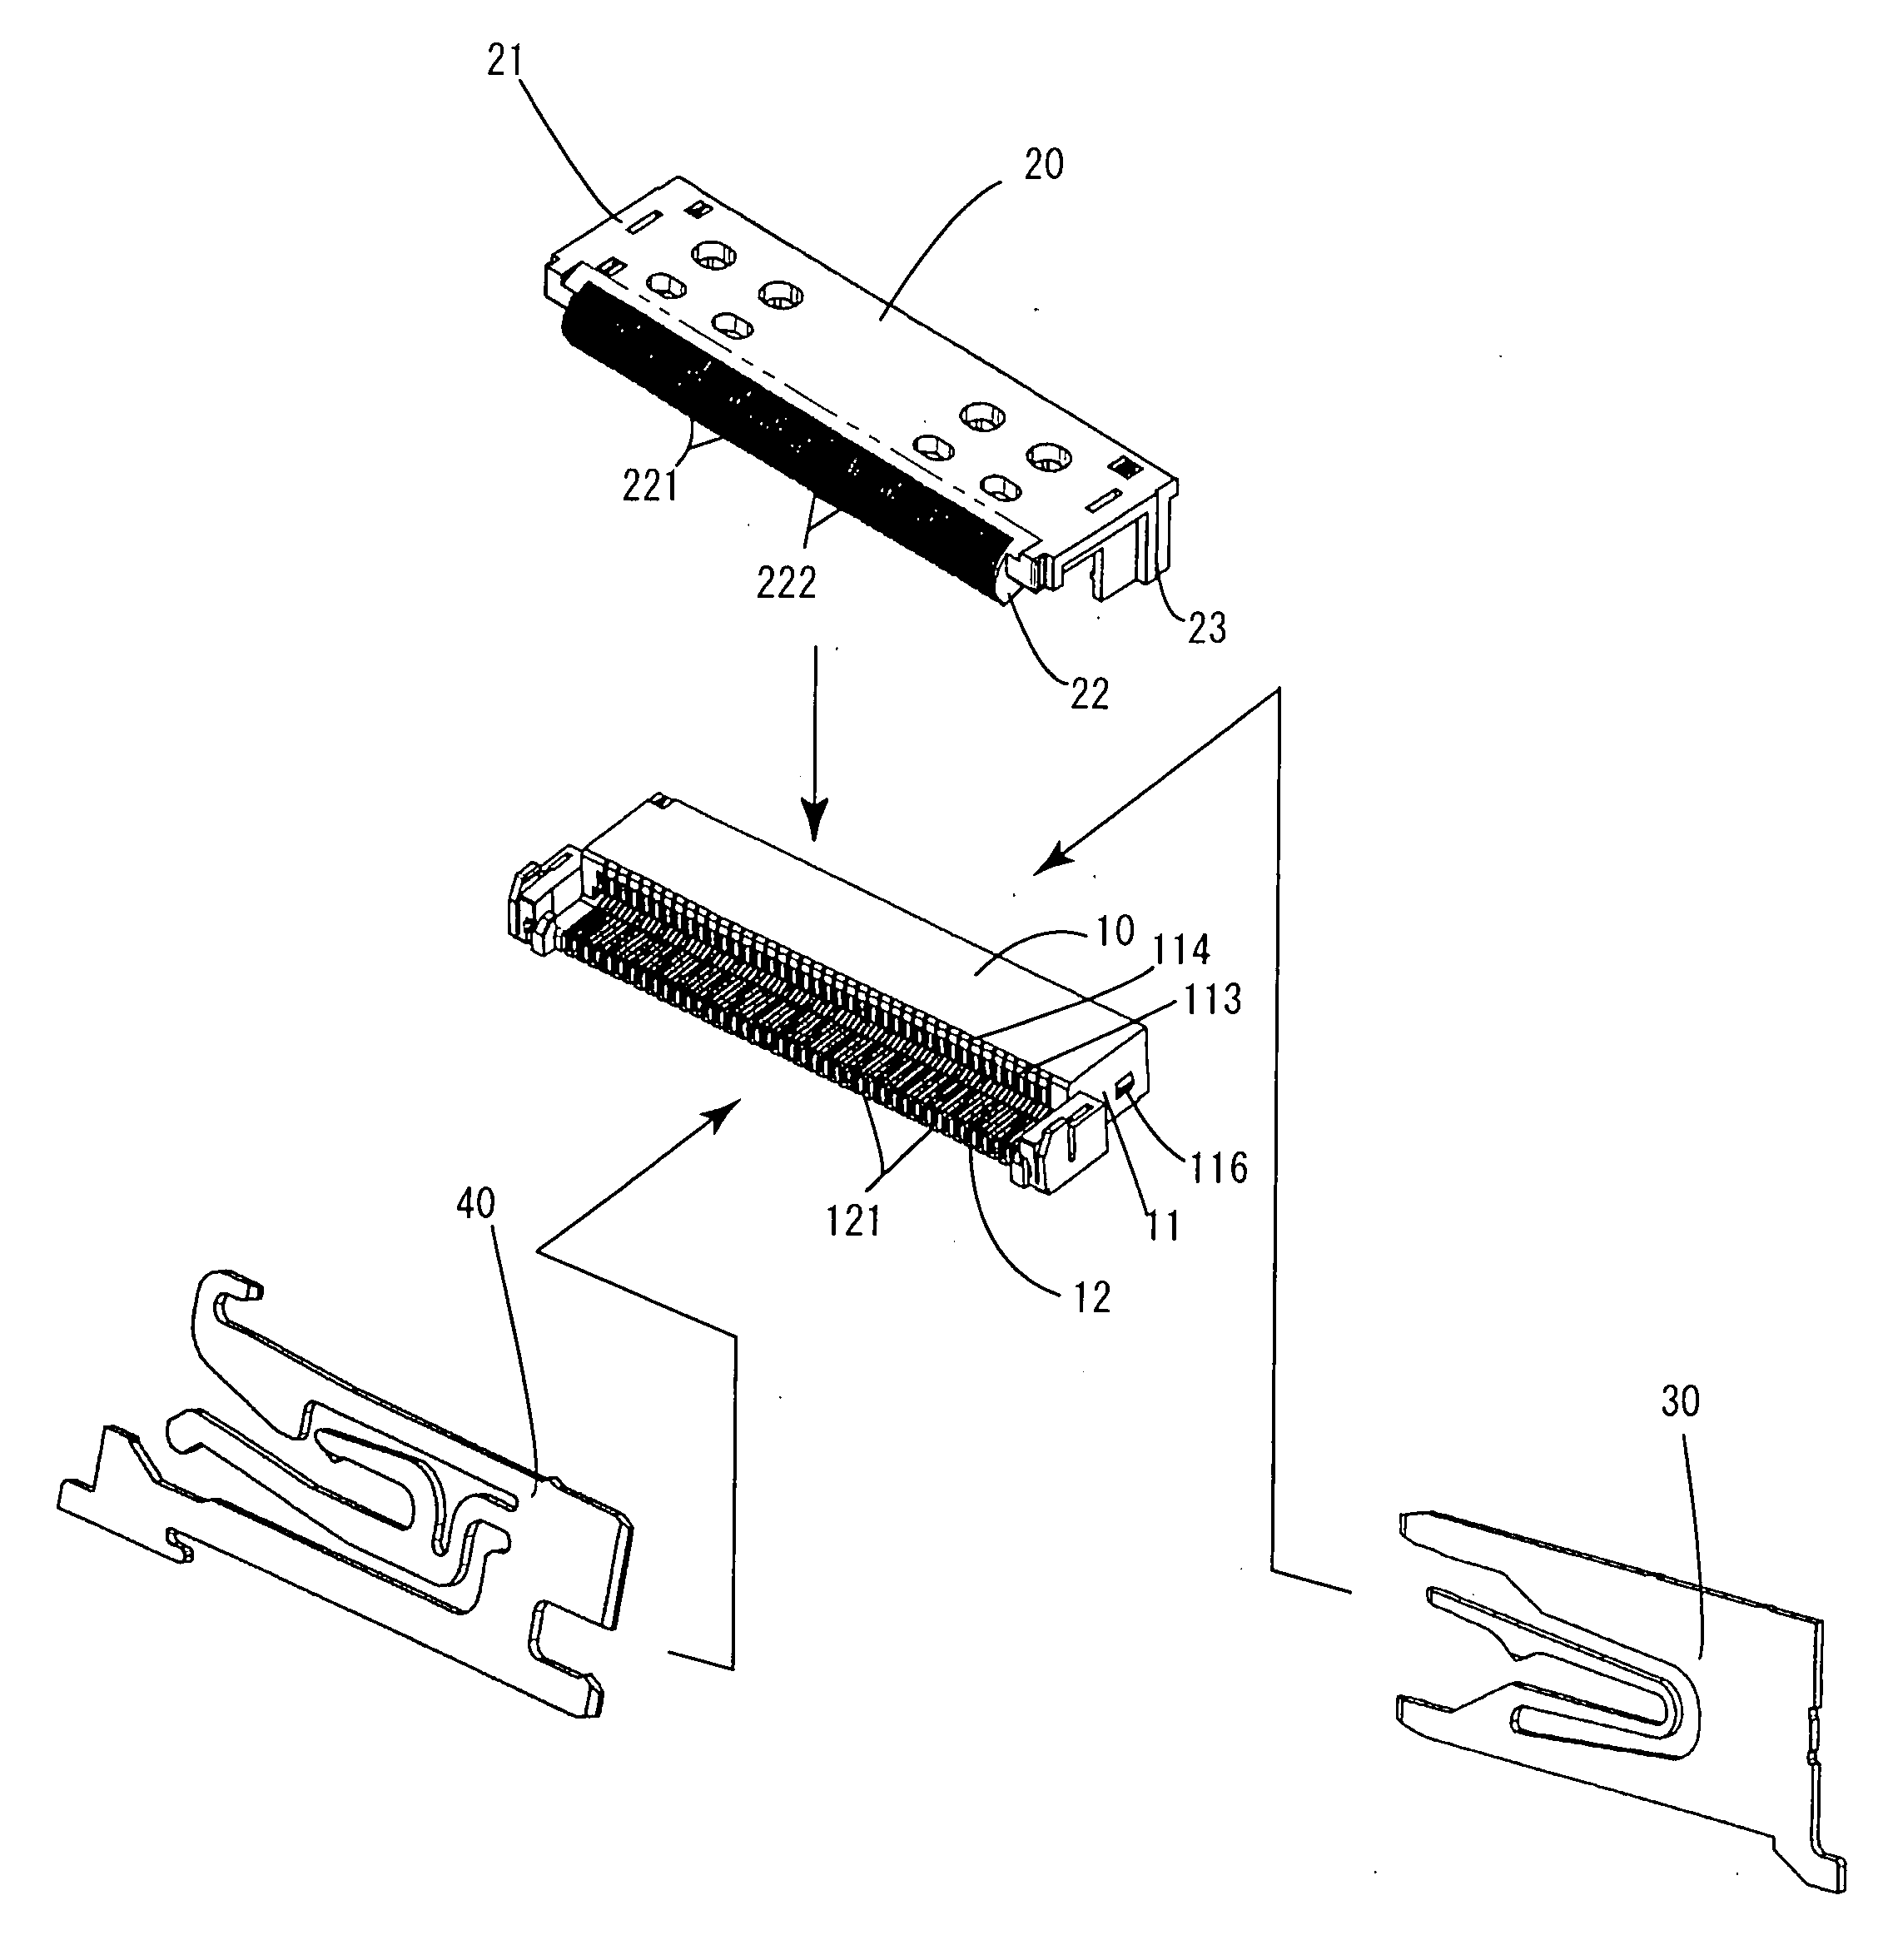 Connector for flexible substrate